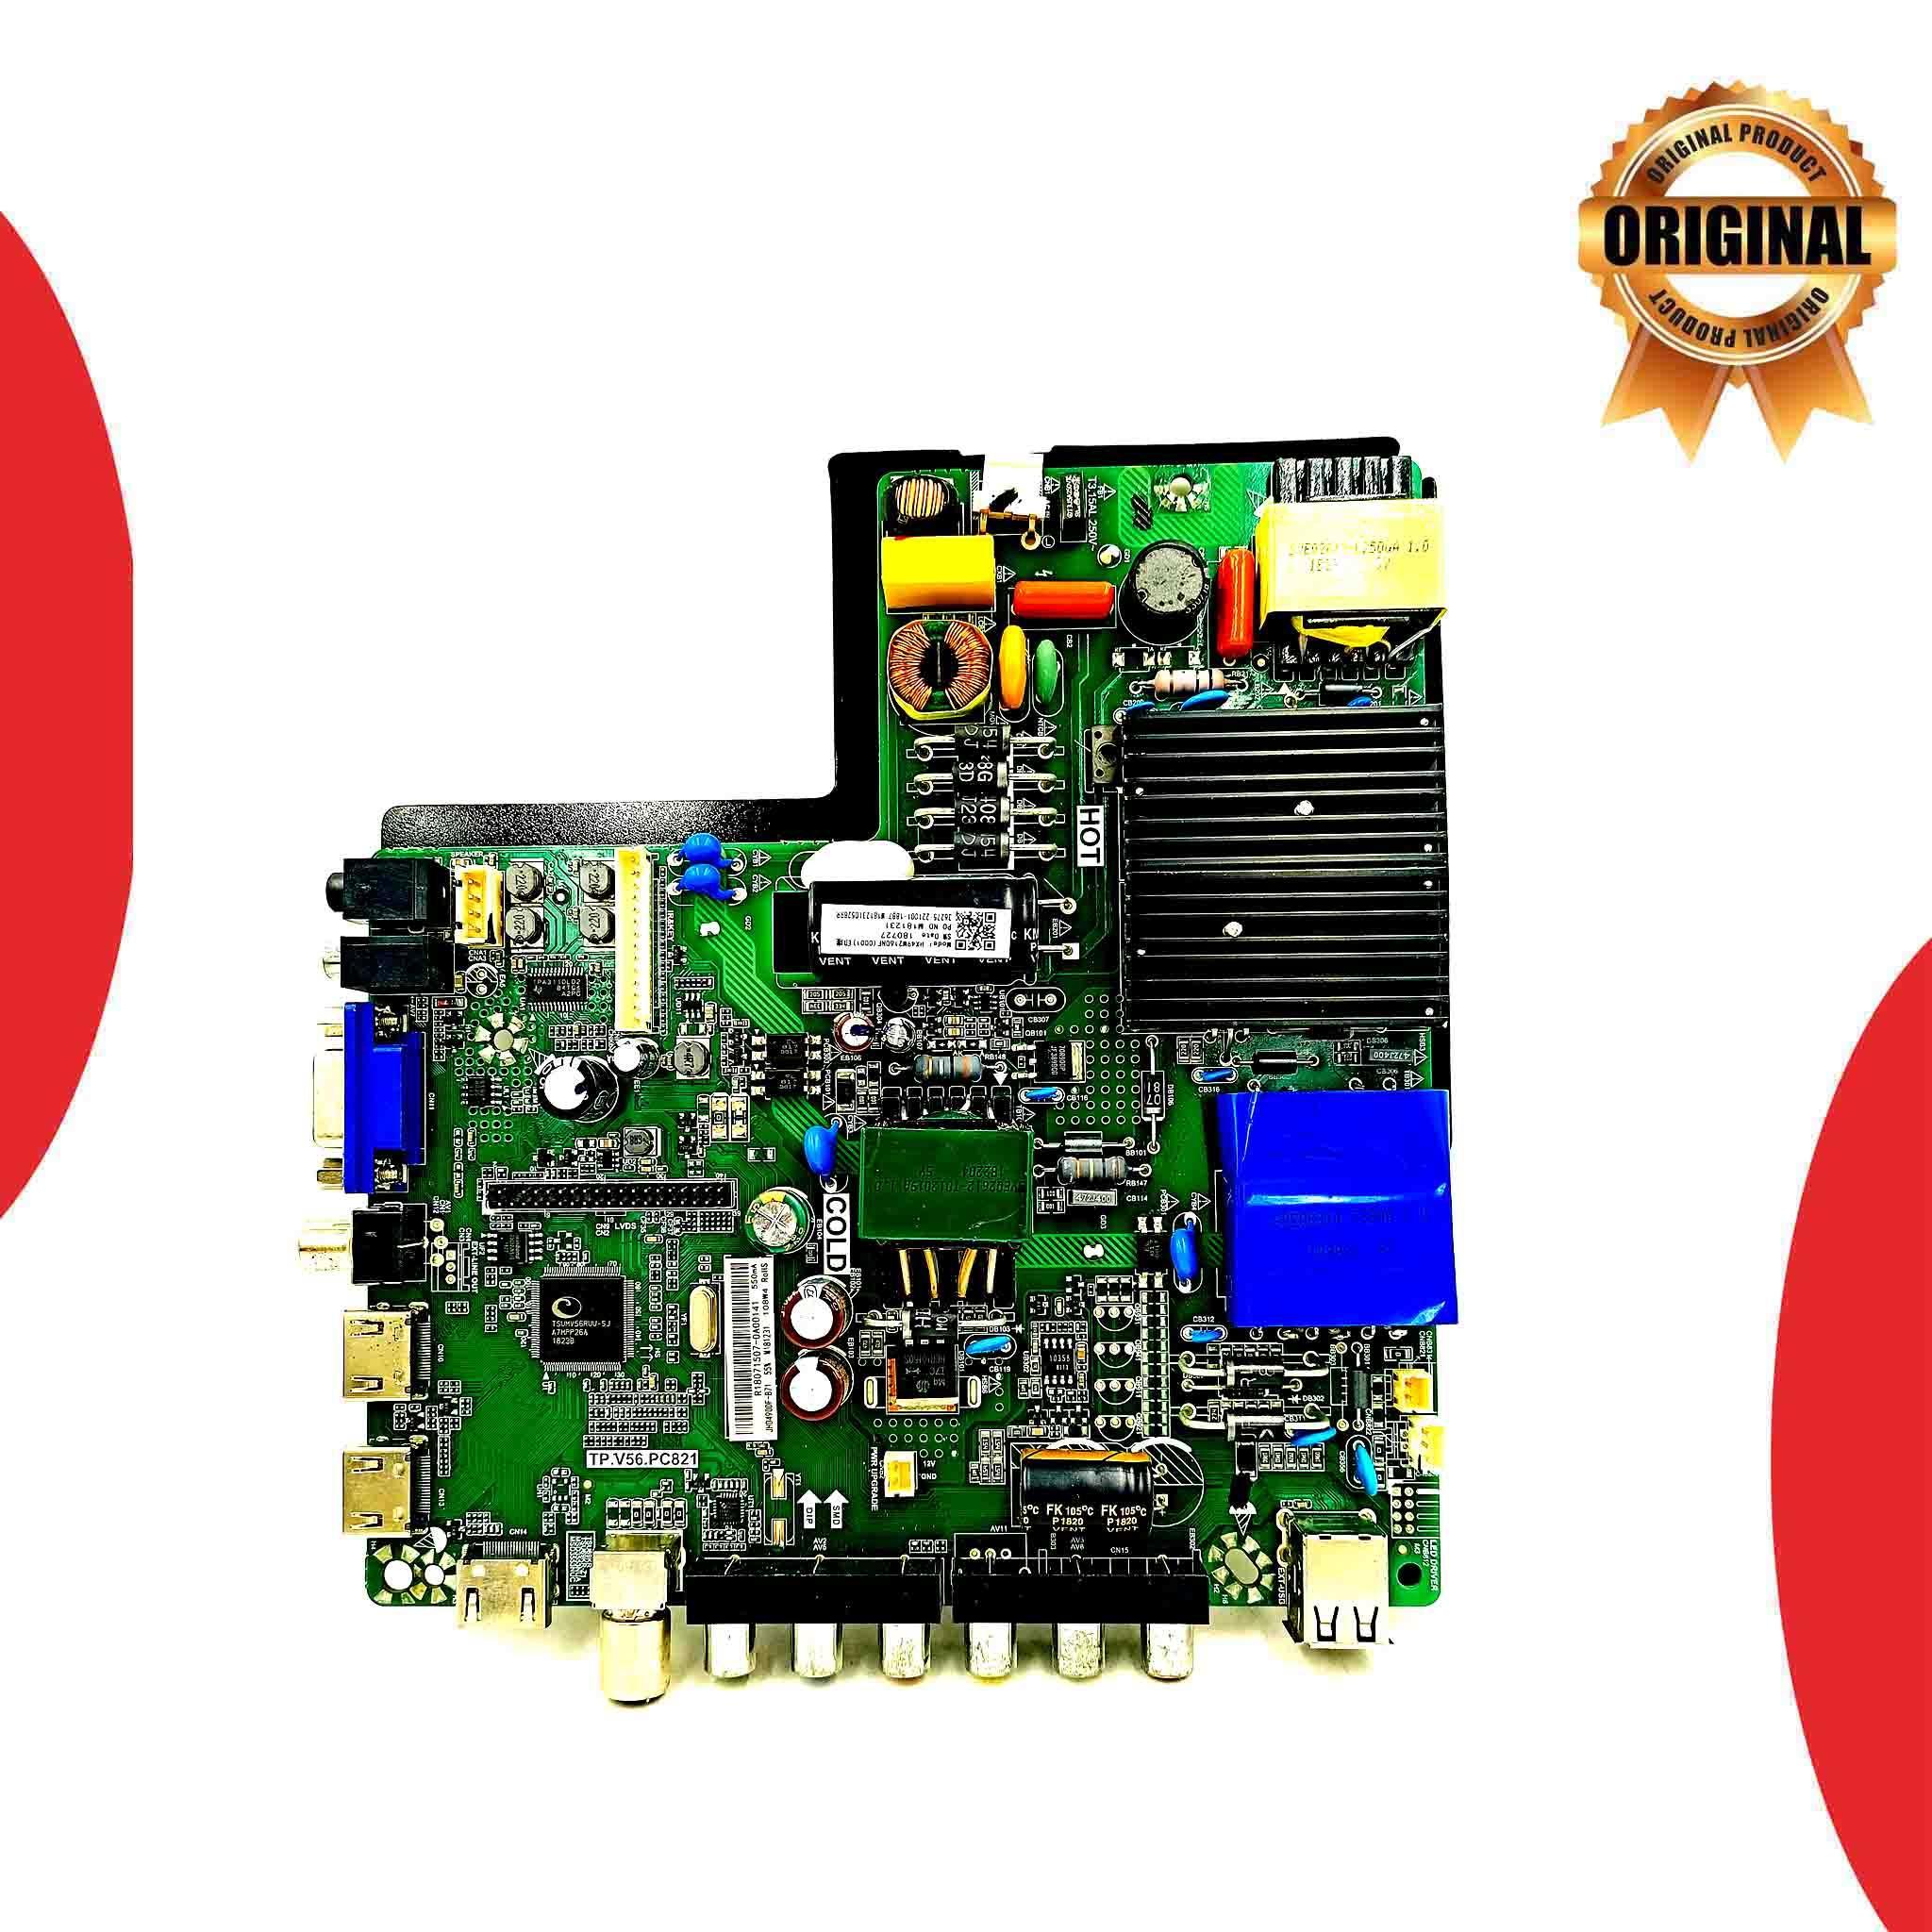 Reconnect 49 inch LED TV Motherboard for Model RELEG4901 - Great Bharat Electronics